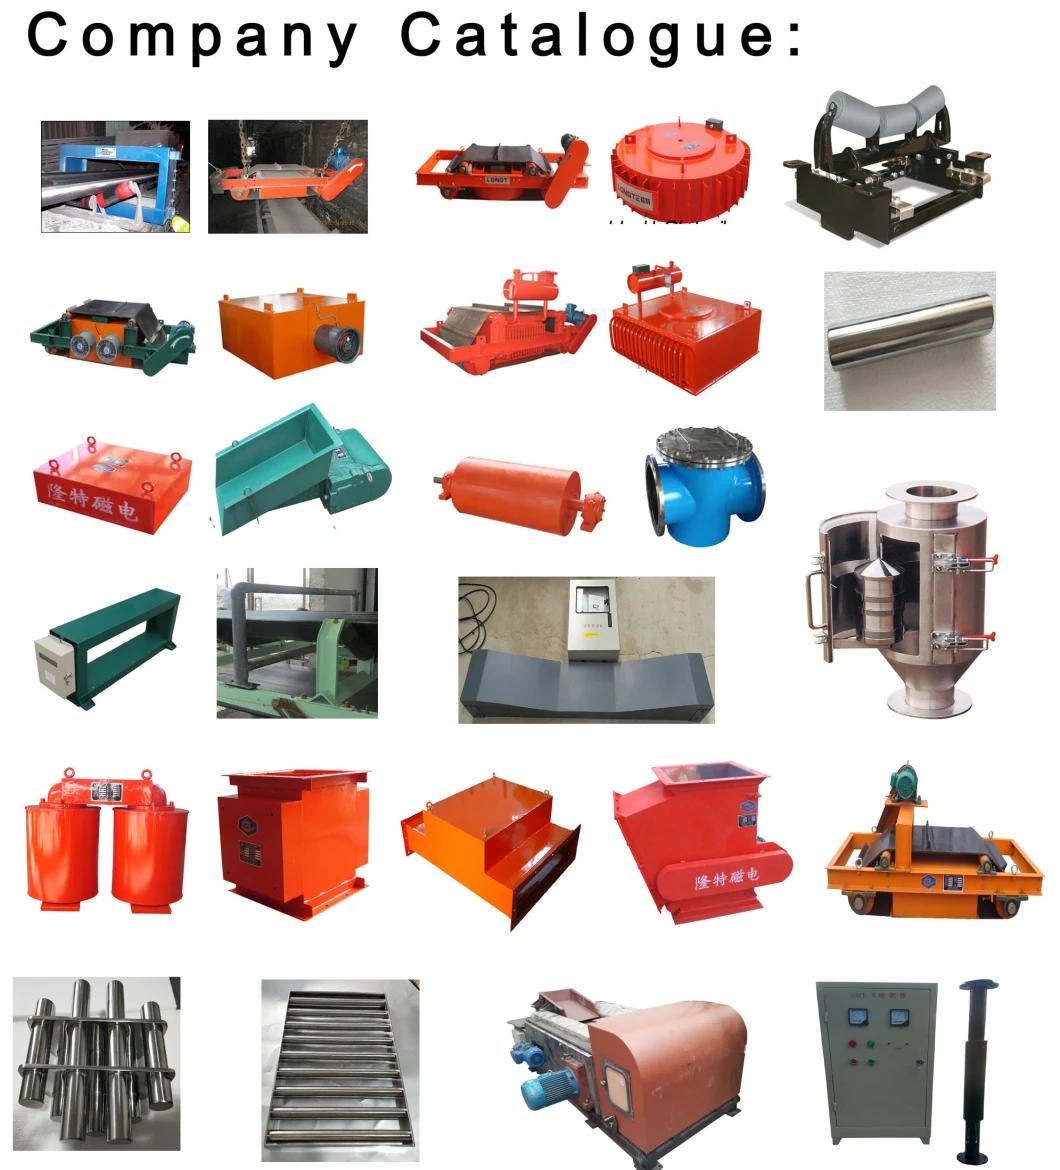 Self Cleaning Permanent Magnetic Ferrous Metal Catcher/Remove Ferrous Metal Protect The Downstream Processing Machinery